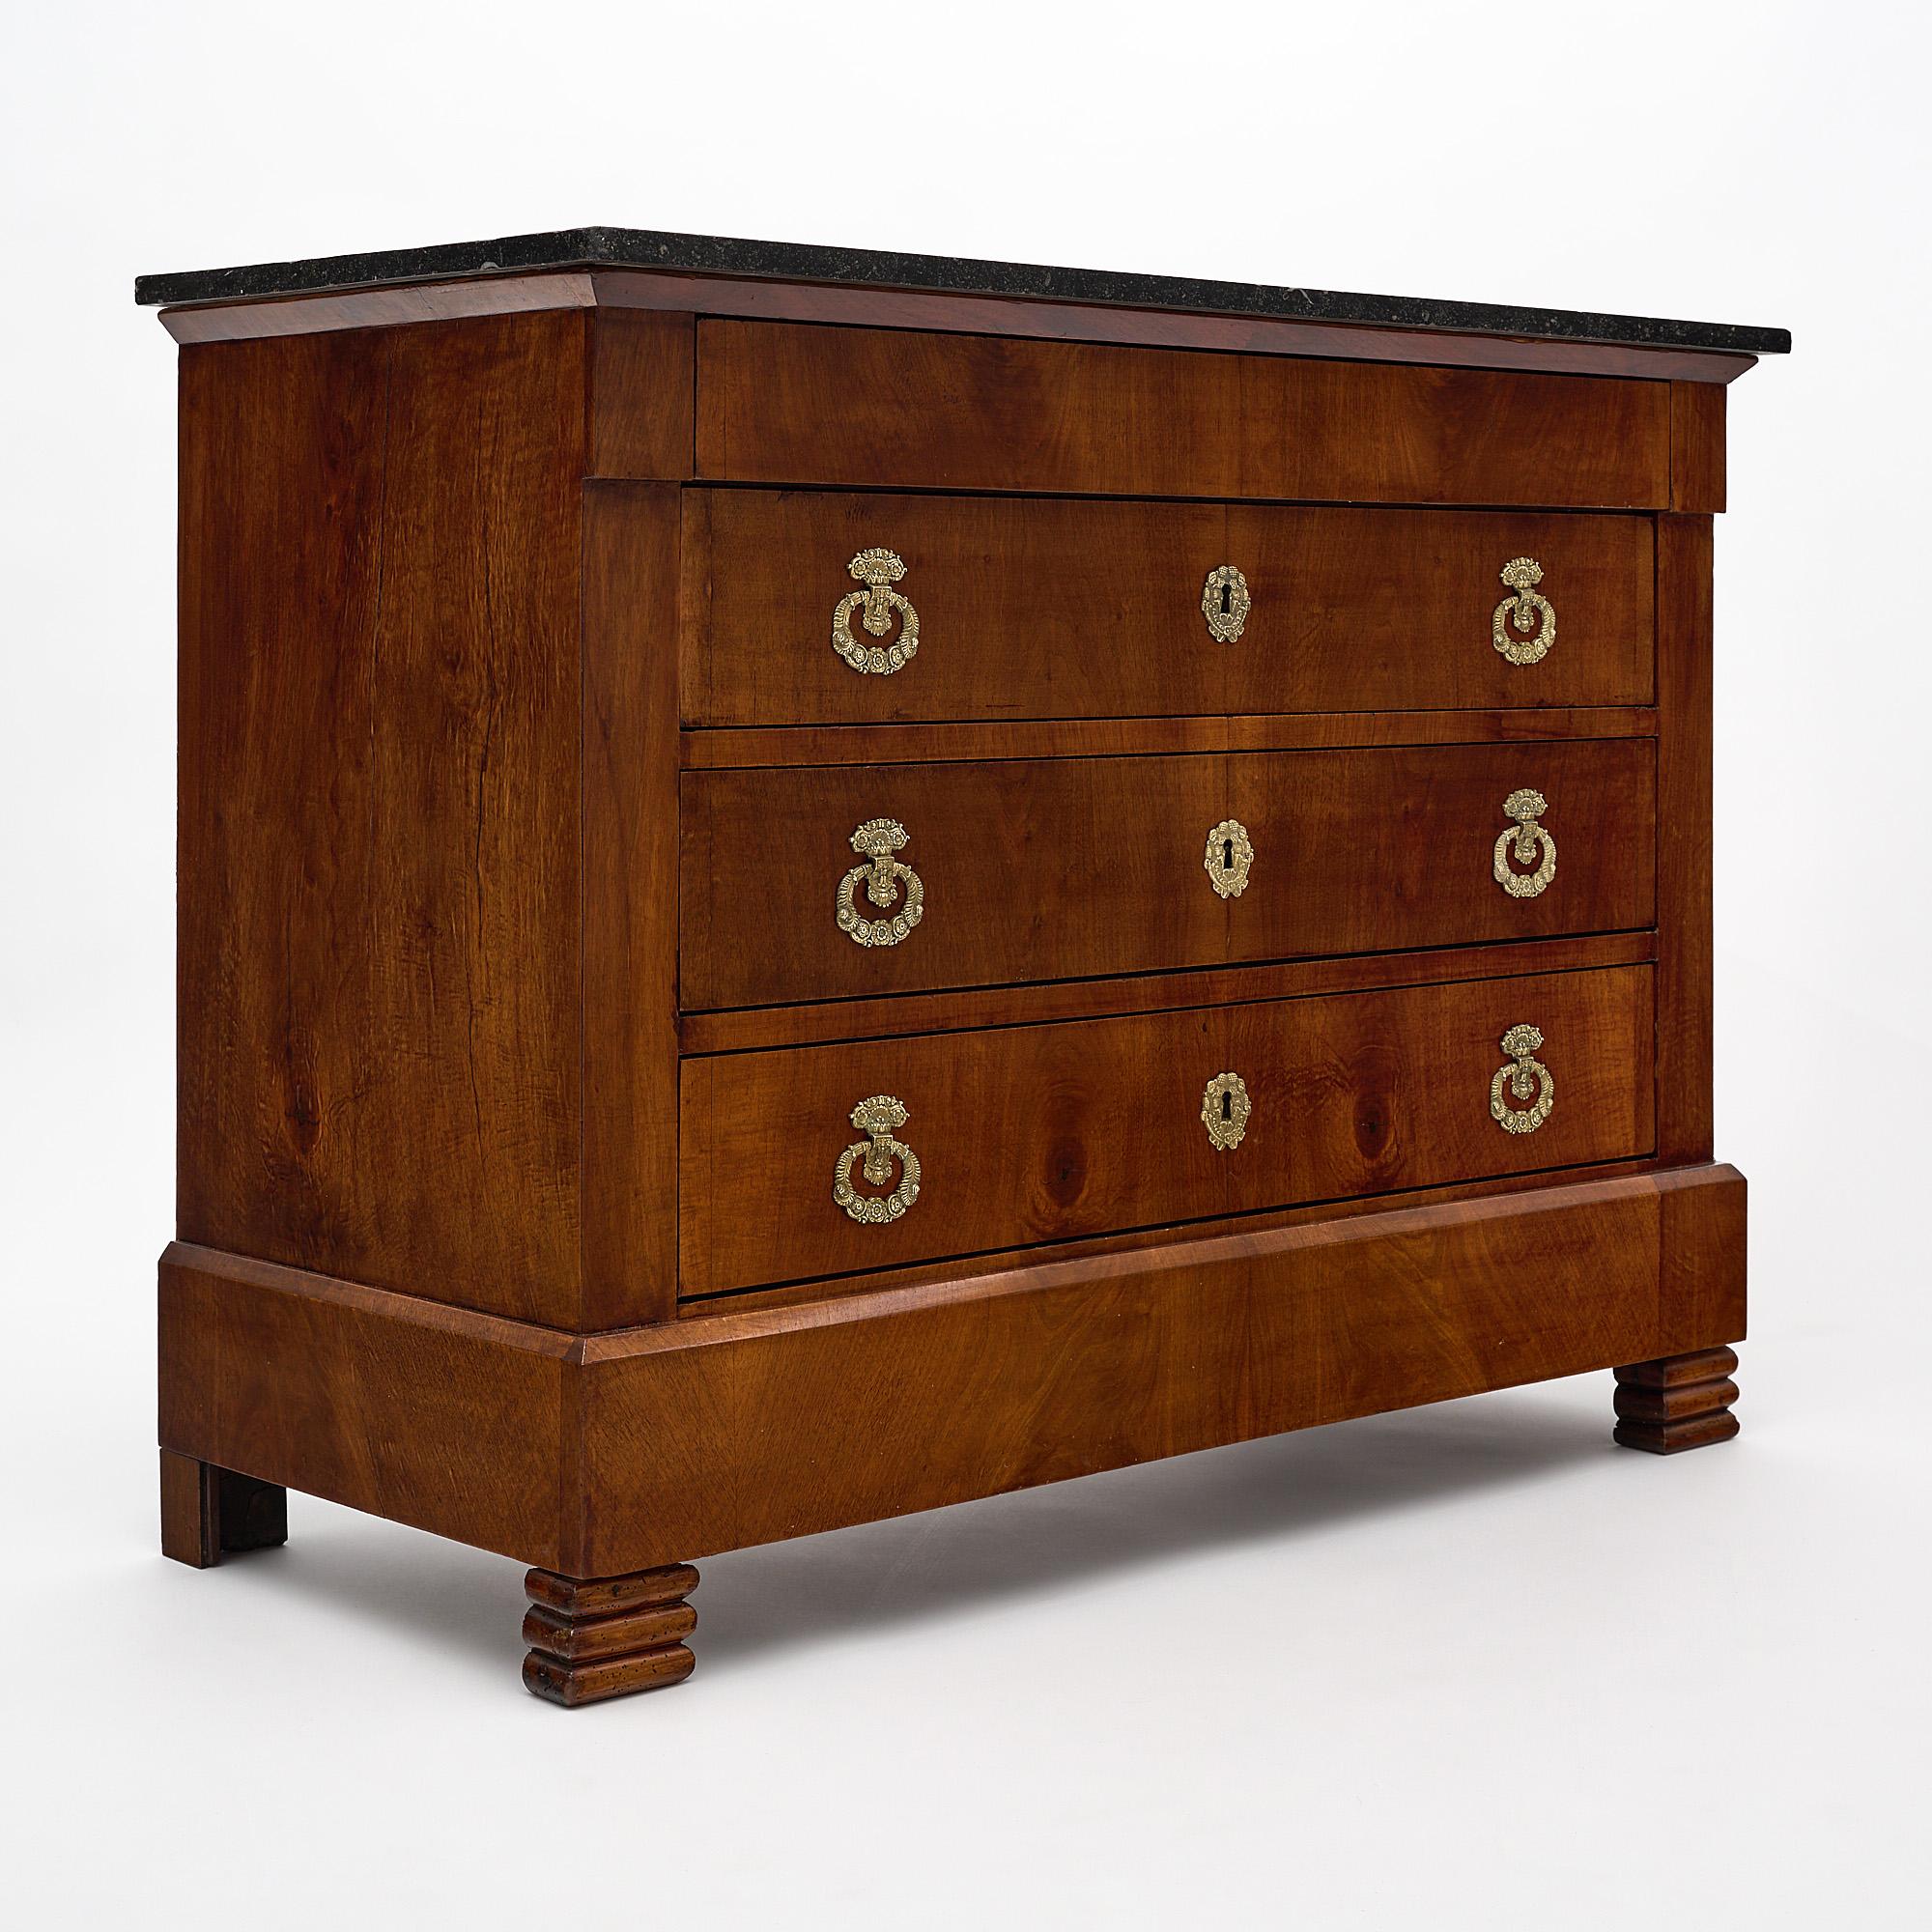 Chest, French, from the Restauration period, made of Mahogany. This chest has three dovetailed drawers in façade and one dovetailed drawer concealed in the apron. On top there is a beautiful intact black marble slab.